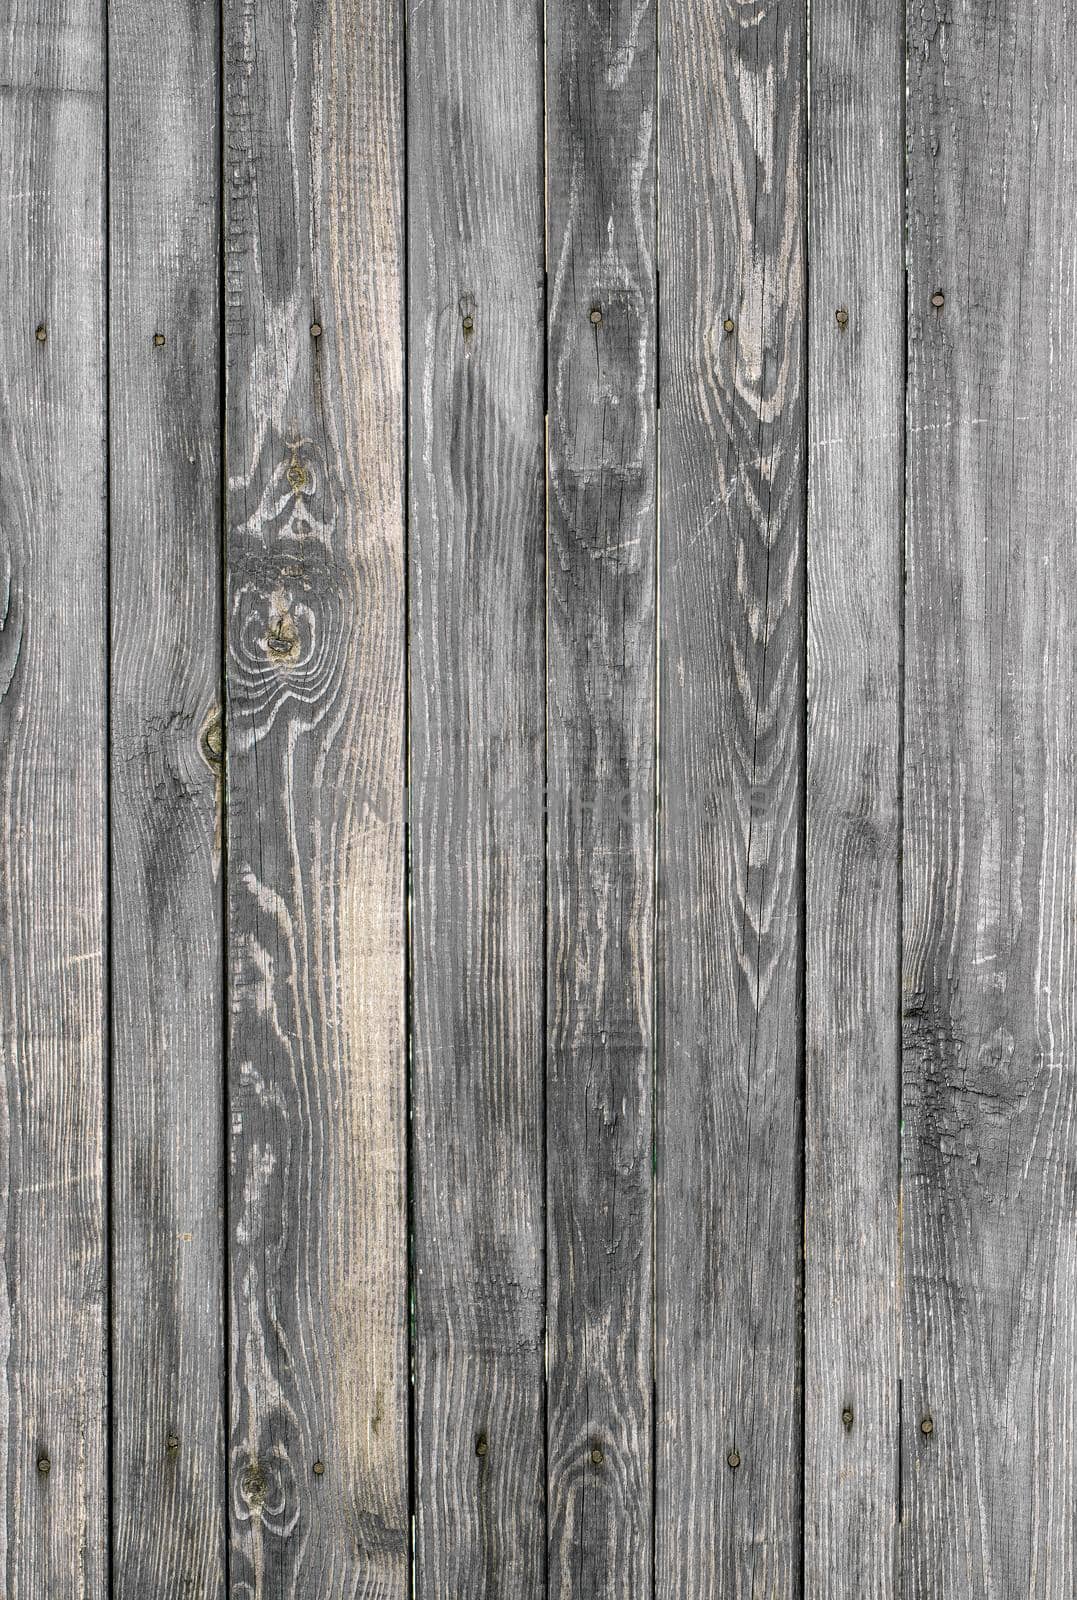 Texture of an old wooden fence with weathered gray planks nailed in rusty nails, vertical shot. by Sergii